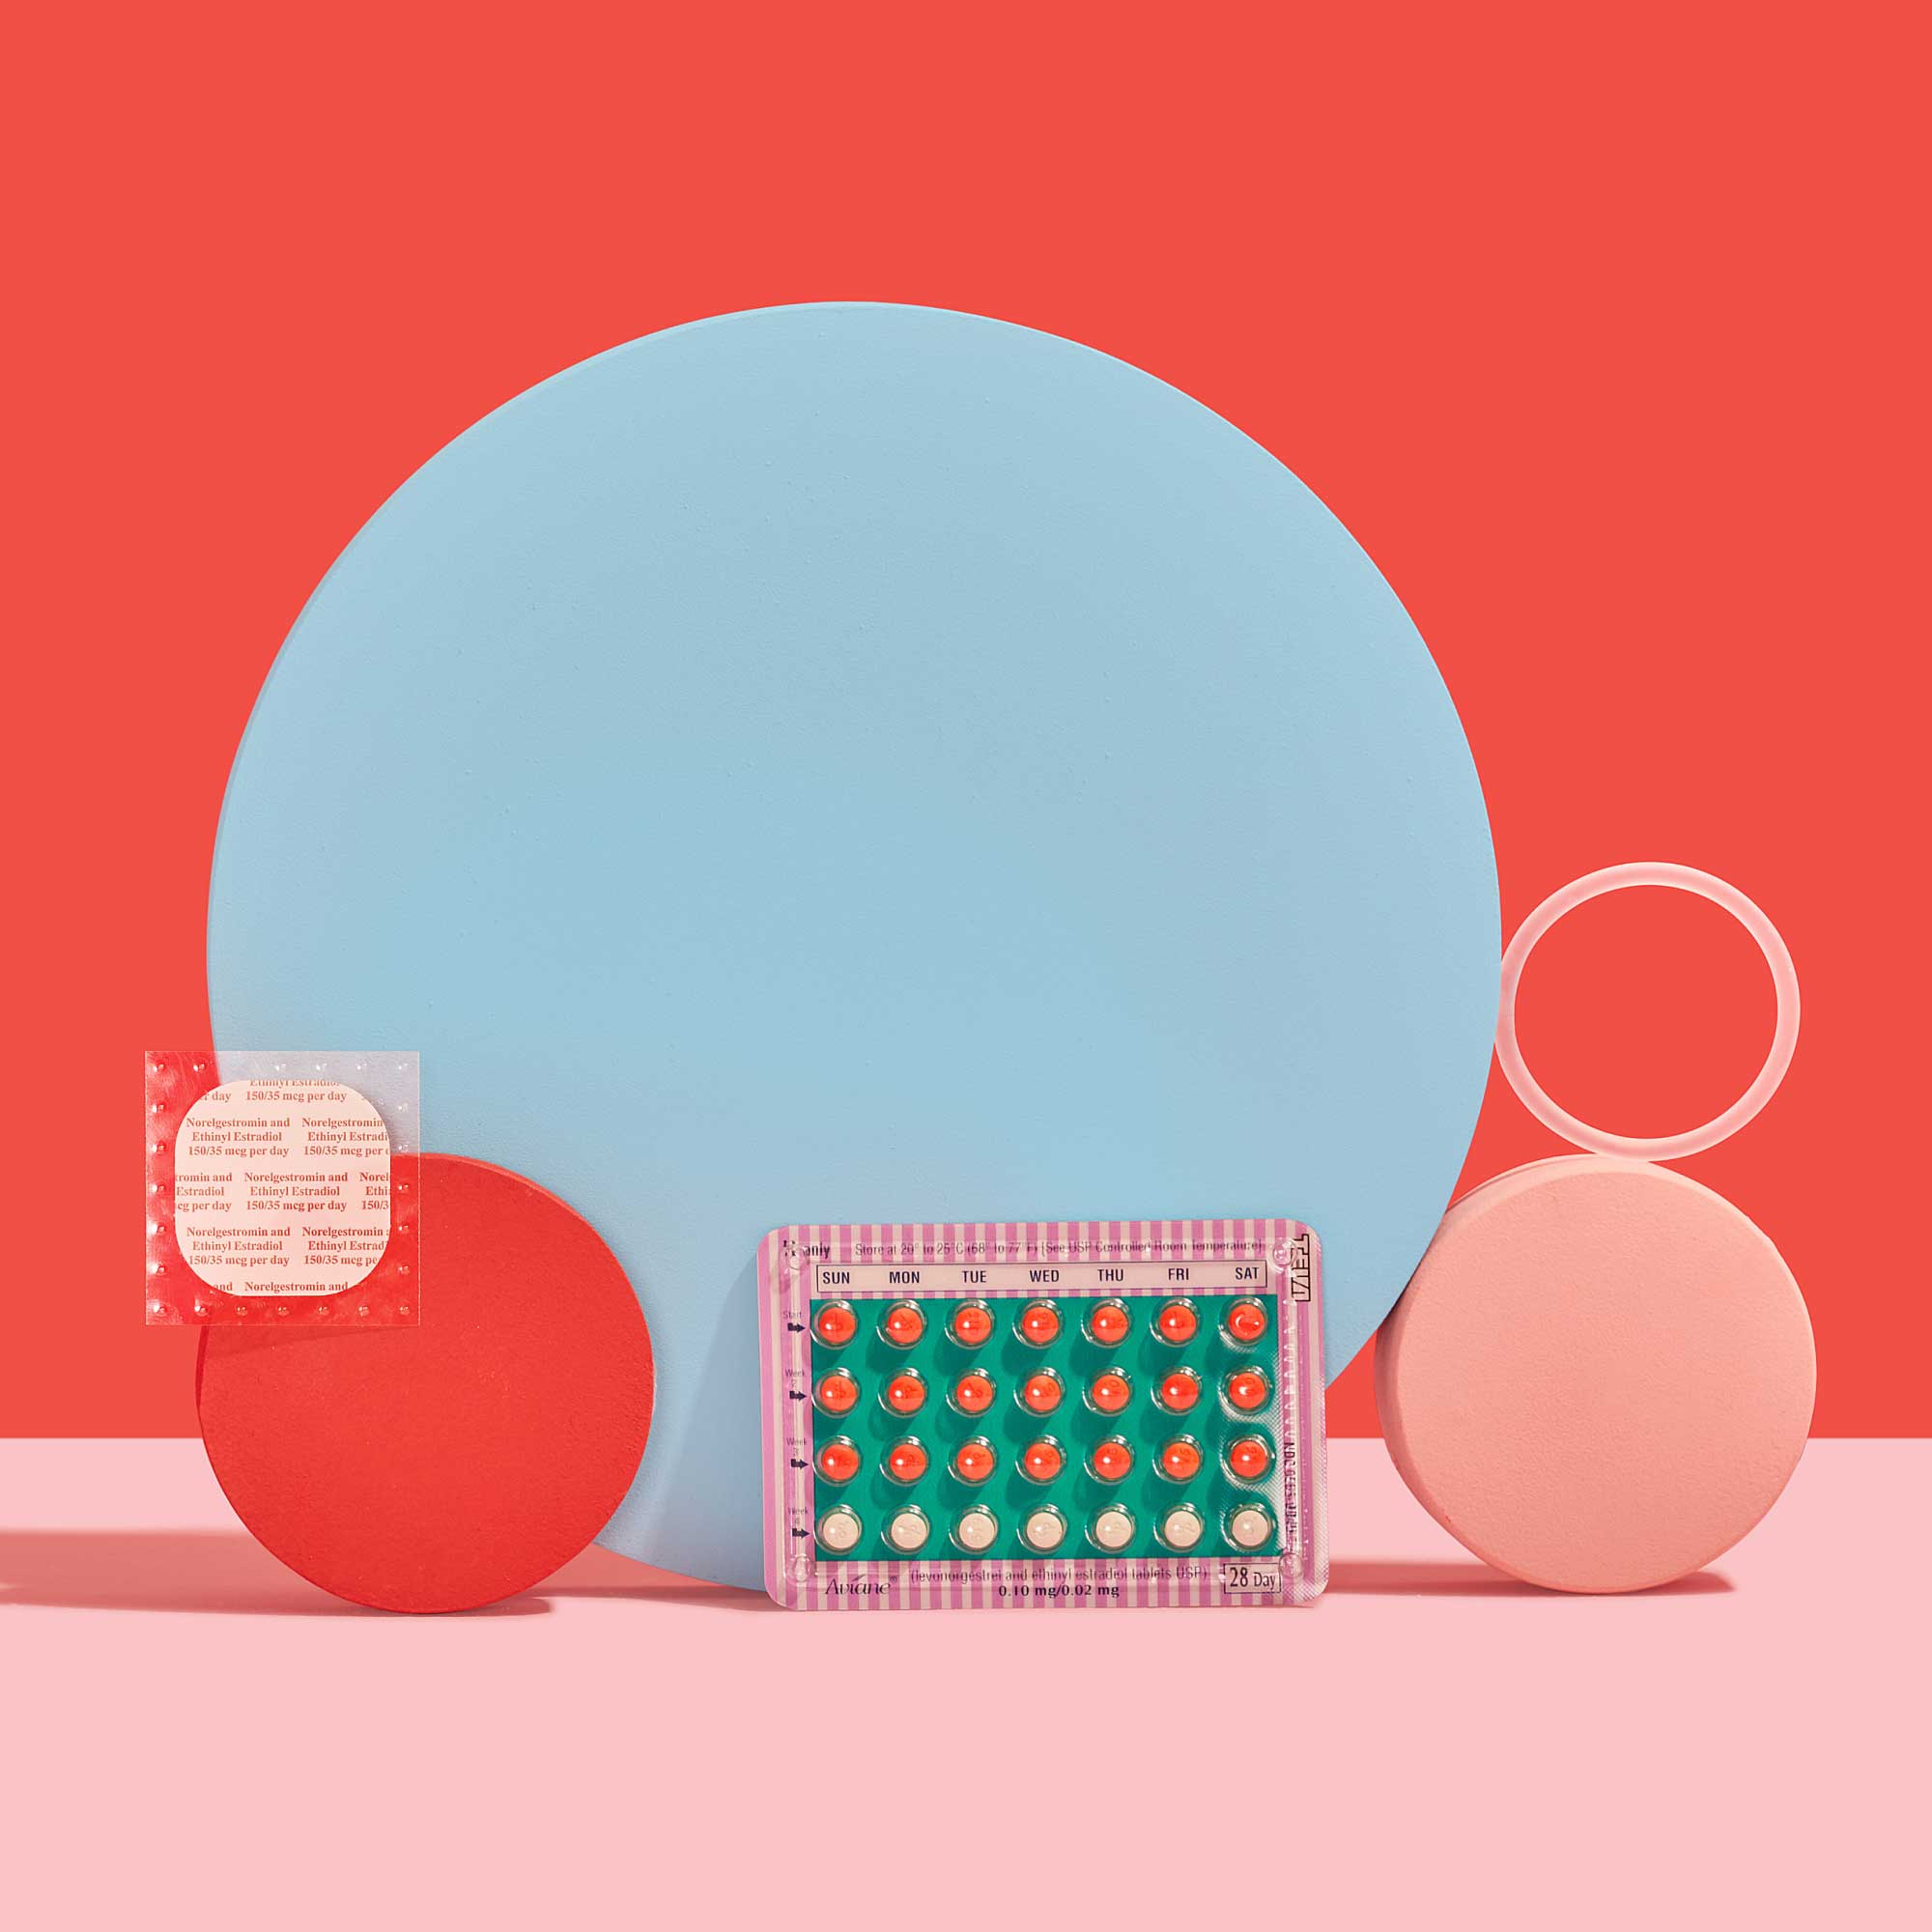 Birth Control pills, the birth control patch, and NuvaRing balanced on colorful abstract shapes on a pink surface with a red background